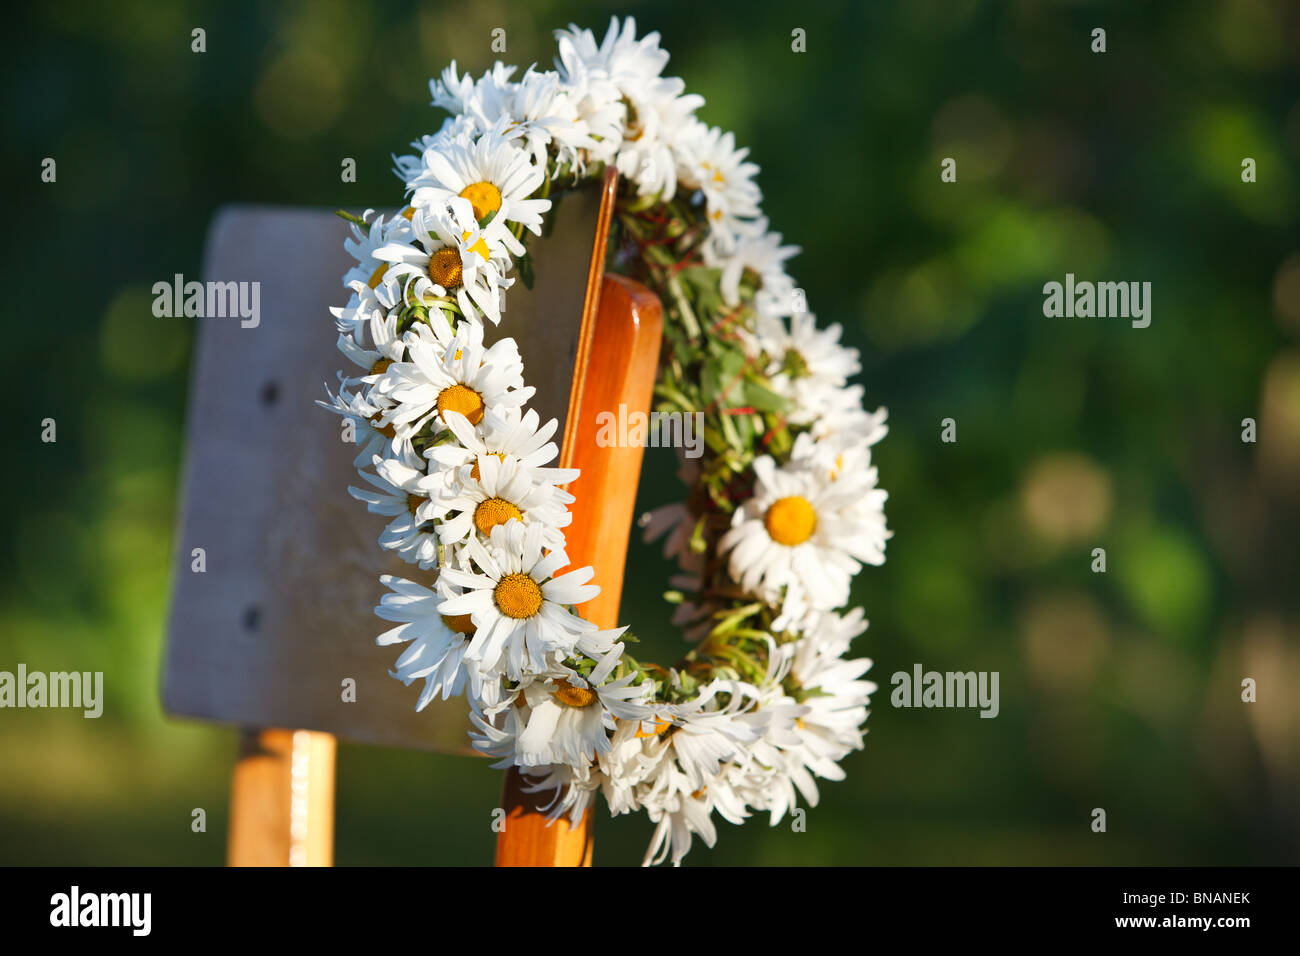 Chaplet from white daisies hanging on chair Stock Photo